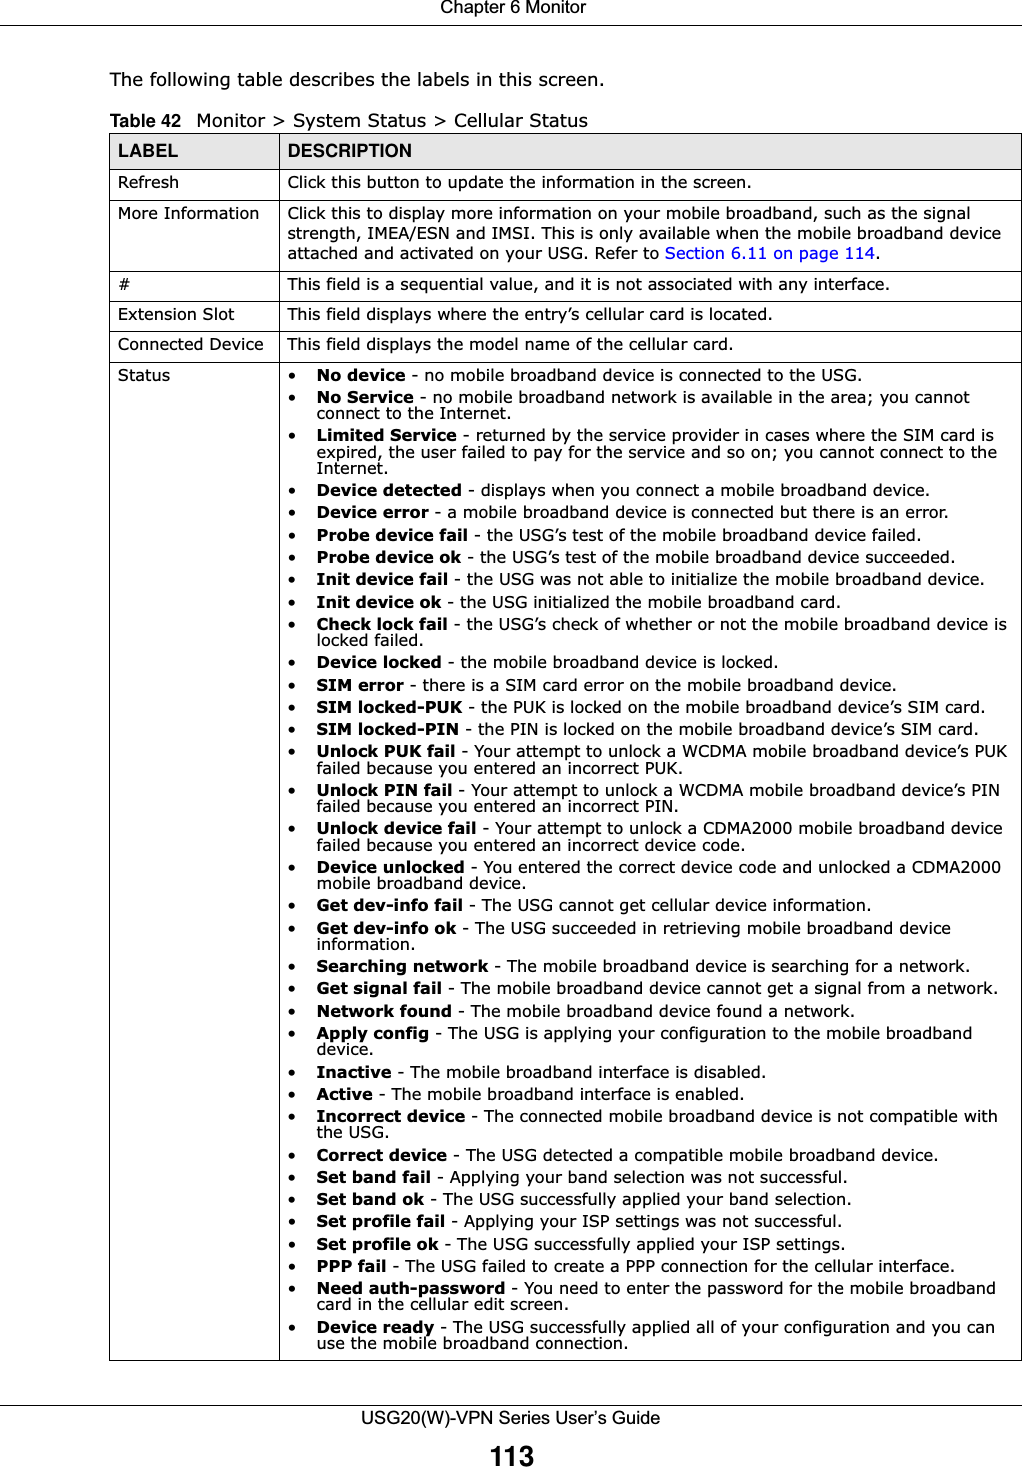  Chapter 6 MonitorUSG20(W)-VPN Series User’s Guide113The following table describes the labels in this screen.Table 42   Monitor &gt; System Status &gt; Cellular StatusLABEL DESCRIPTIONRefresh Click this button to update the information in the screen.More Information Click this to display more information on your mobile broadband, such as the signal strength, IMEA/ESN and IMSI. This is only available when the mobile broadband device attached and activated on your USG. Refer to Section 6.11 on page 114.#This field is a sequential value, and it is not associated with any interface.Extension Slot This field displays where the entry’s cellular card is located.Connected Device This field displays the model name of the cellular card.Status • No device - no mobile broadband device is connected to the USG.•No Service - no mobile broadband network is available in the area; you cannot connect to the Internet.•Limited Service - returned by the service provider in cases where the SIM card is expired, the user failed to pay for the service and so on; you cannot connect to the Internet.•Device detected - displays when you connect a mobile broadband device.•Device error - a mobile broadband device is connected but there is an error.•Probe device fail - the USG’s test of the mobile broadband device failed.•Probe device ok - the USG’s test of the mobile broadband device succeeded.•Init device fail - the USG was not able to initialize the mobile broadband device.•Init device ok - the USG initialized the mobile broadband card.•Check lock fail - the USG’s check of whether or not the mobile broadband device is locked failed. •Device locked - the mobile broadband device is locked.•SIM error - there is a SIM card error on the mobile broadband device.•SIM locked-PUK - the PUK is locked on the mobile broadband device’s SIM card.•SIM locked-PIN - the PIN is locked on the mobile broadband device’s SIM card.•Unlock PUK fail - Your attempt to unlock a WCDMA mobile broadband device’s PUK failed because you entered an incorrect PUK.•Unlock PIN fail - Your attempt to unlock a WCDMA mobile broadband device’s PIN failed because you entered an incorrect PIN. •Unlock device fail - Your attempt to unlock a CDMA2000 mobile broadband device failed because you entered an incorrect device code. •Device unlocked - You entered the correct device code and unlocked a CDMA2000 mobile broadband device.•Get dev-info fail - The USG cannot get cellular device information.•Get dev-info ok - The USG succeeded in retrieving mobile broadband device information.•Searching network - The mobile broadband device is searching for a network.•Get signal fail - The mobile broadband device cannot get a signal from a network. •Network found - The mobile broadband device found a network.•Apply config - The USG is applying your configuration to the mobile broadband device.•Inactive - The mobile broadband interface is disabled.•Active - The mobile broadband interface is enabled.•Incorrect device - The connected mobile broadband device is not compatible with the USG.•Correct device - The USG detected a compatible mobile broadband device.•Set band fail - Applying your band selection was not successful.•Set band ok - The USG successfully applied your band selection.•Set profile fail - Applying your ISP settings was not successful.•Set profile ok - The USG successfully applied your ISP settings.•PPP fail - The USG failed to create a PPP connection for the cellular interface.•Need auth-password - You need to enter the password for the mobile broadband card in the cellular edit screen.•Device ready - The USG successfully applied all of your configuration and you can use the mobile broadband connection. 